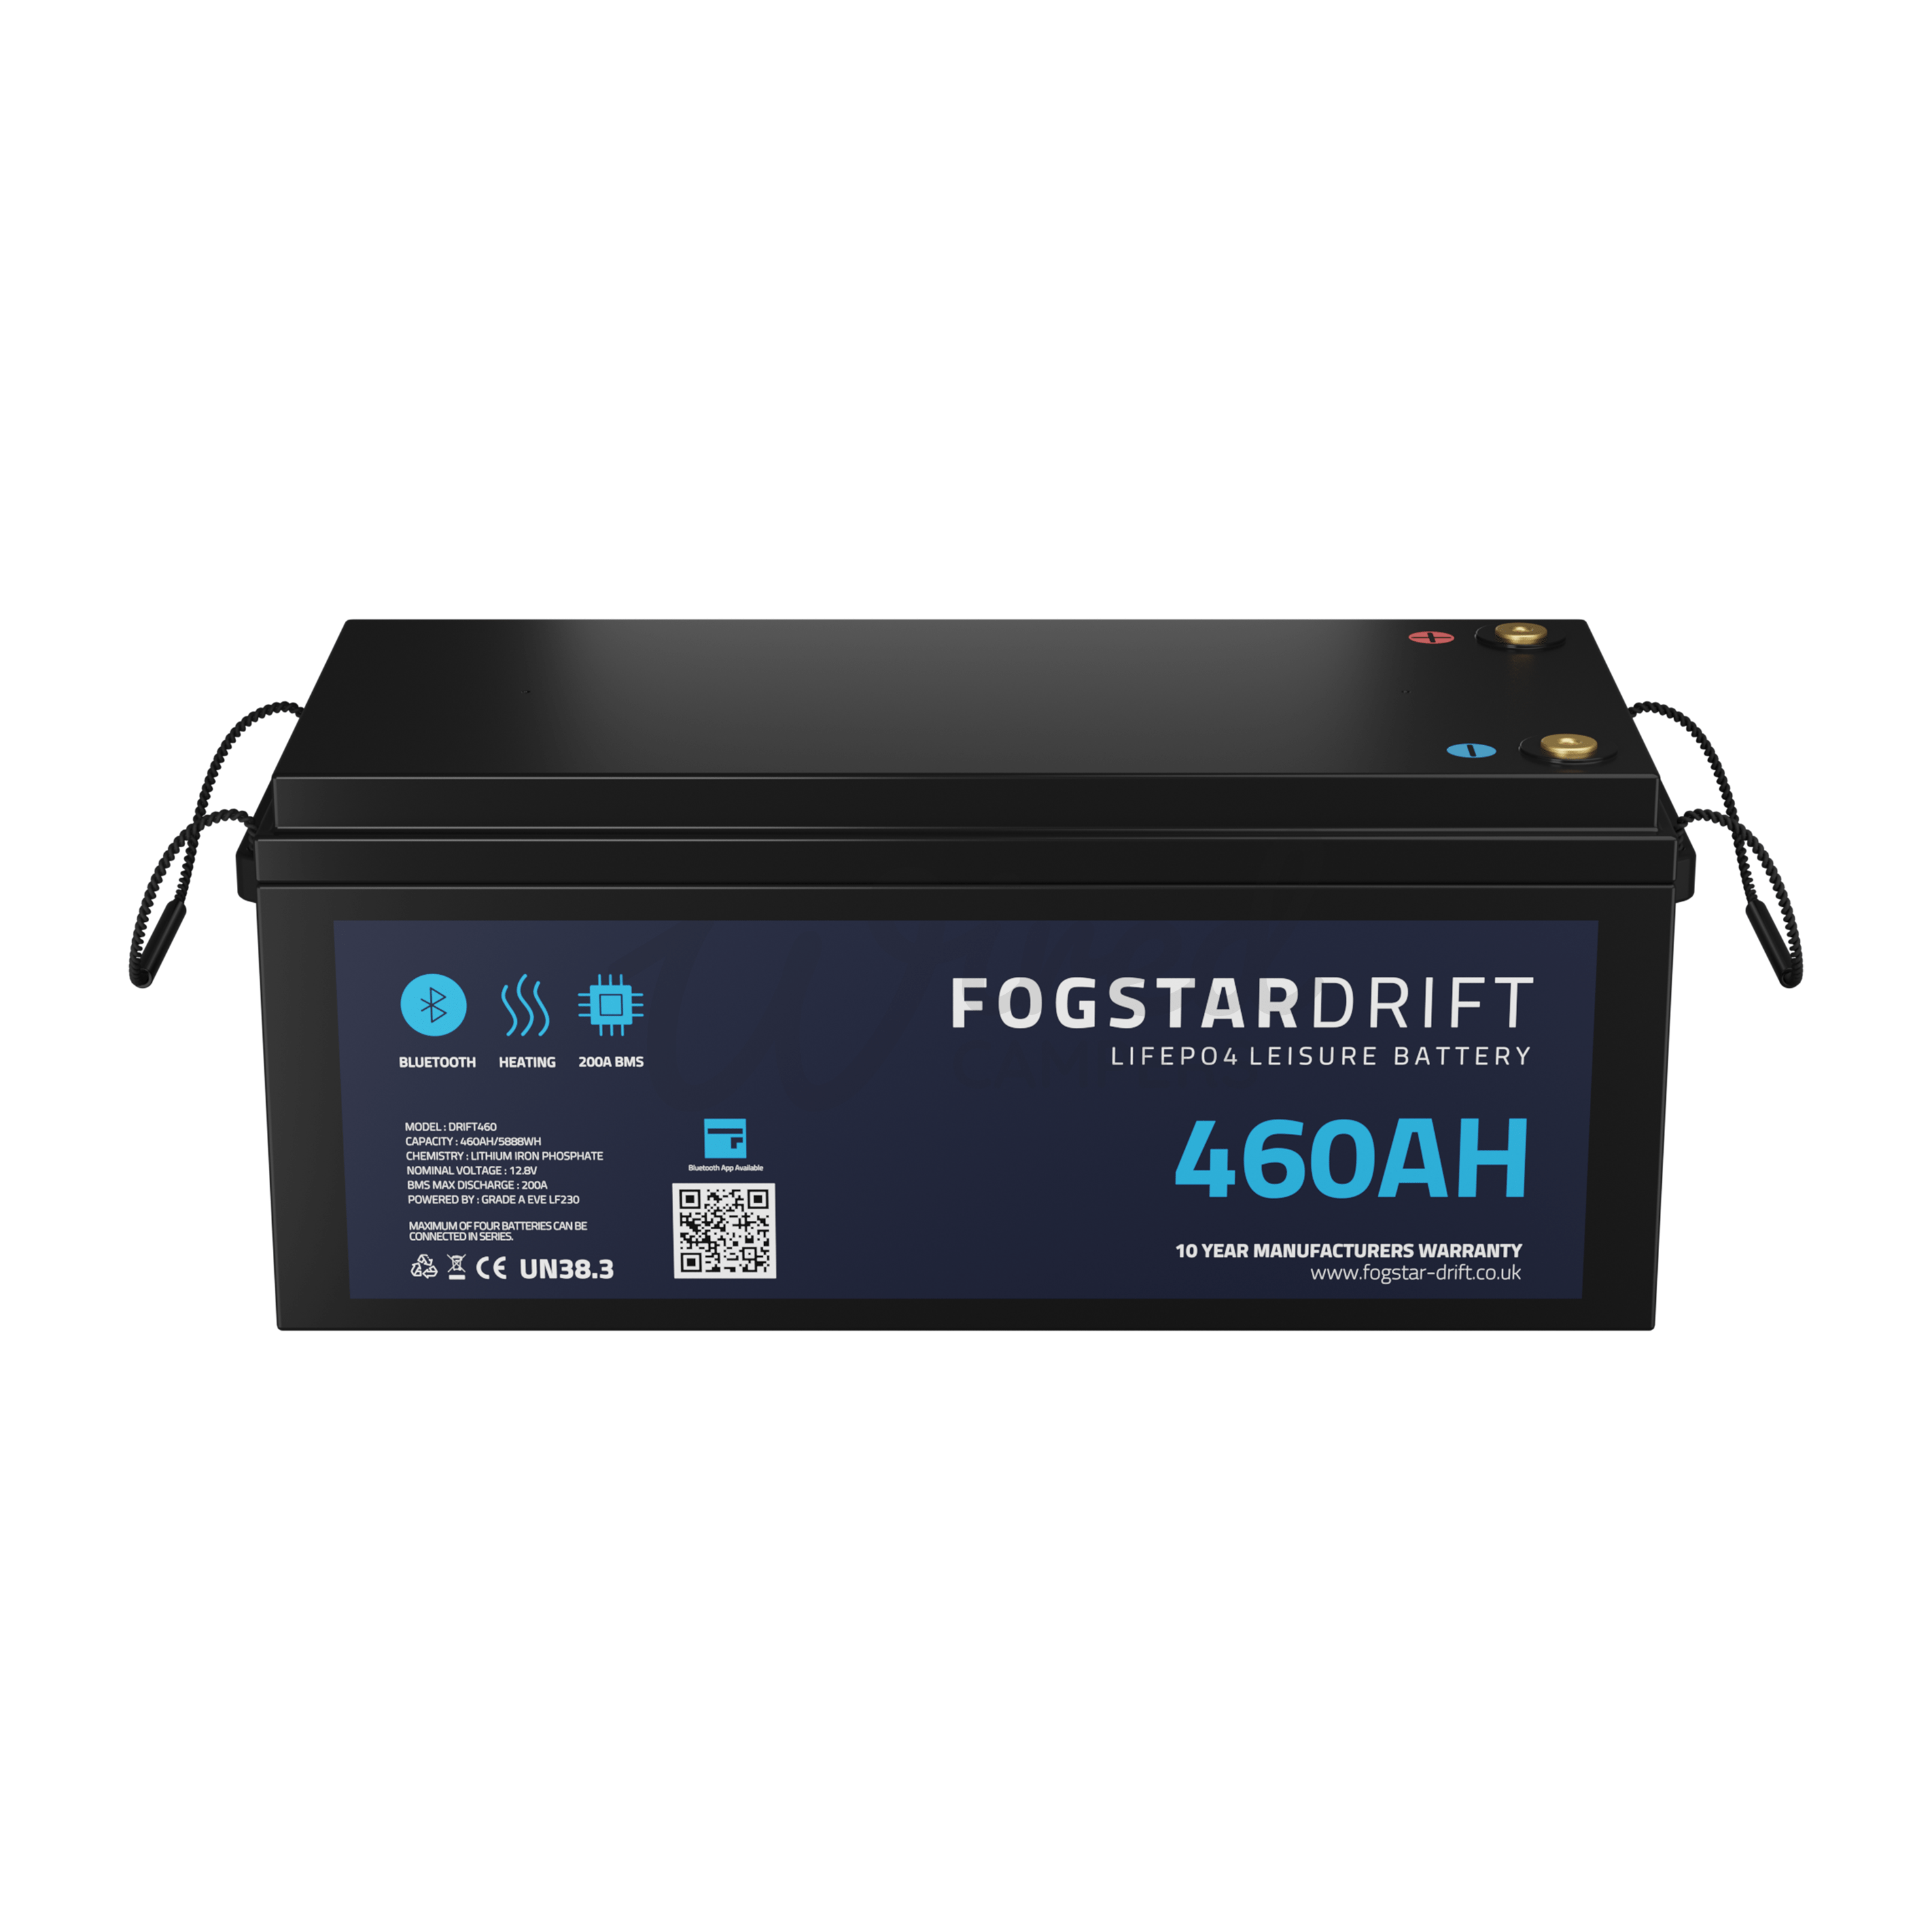 Wired Campers Limited Fogstar Drift 12V 460AH Heated Lithium LiFePO4 Leisure Battery